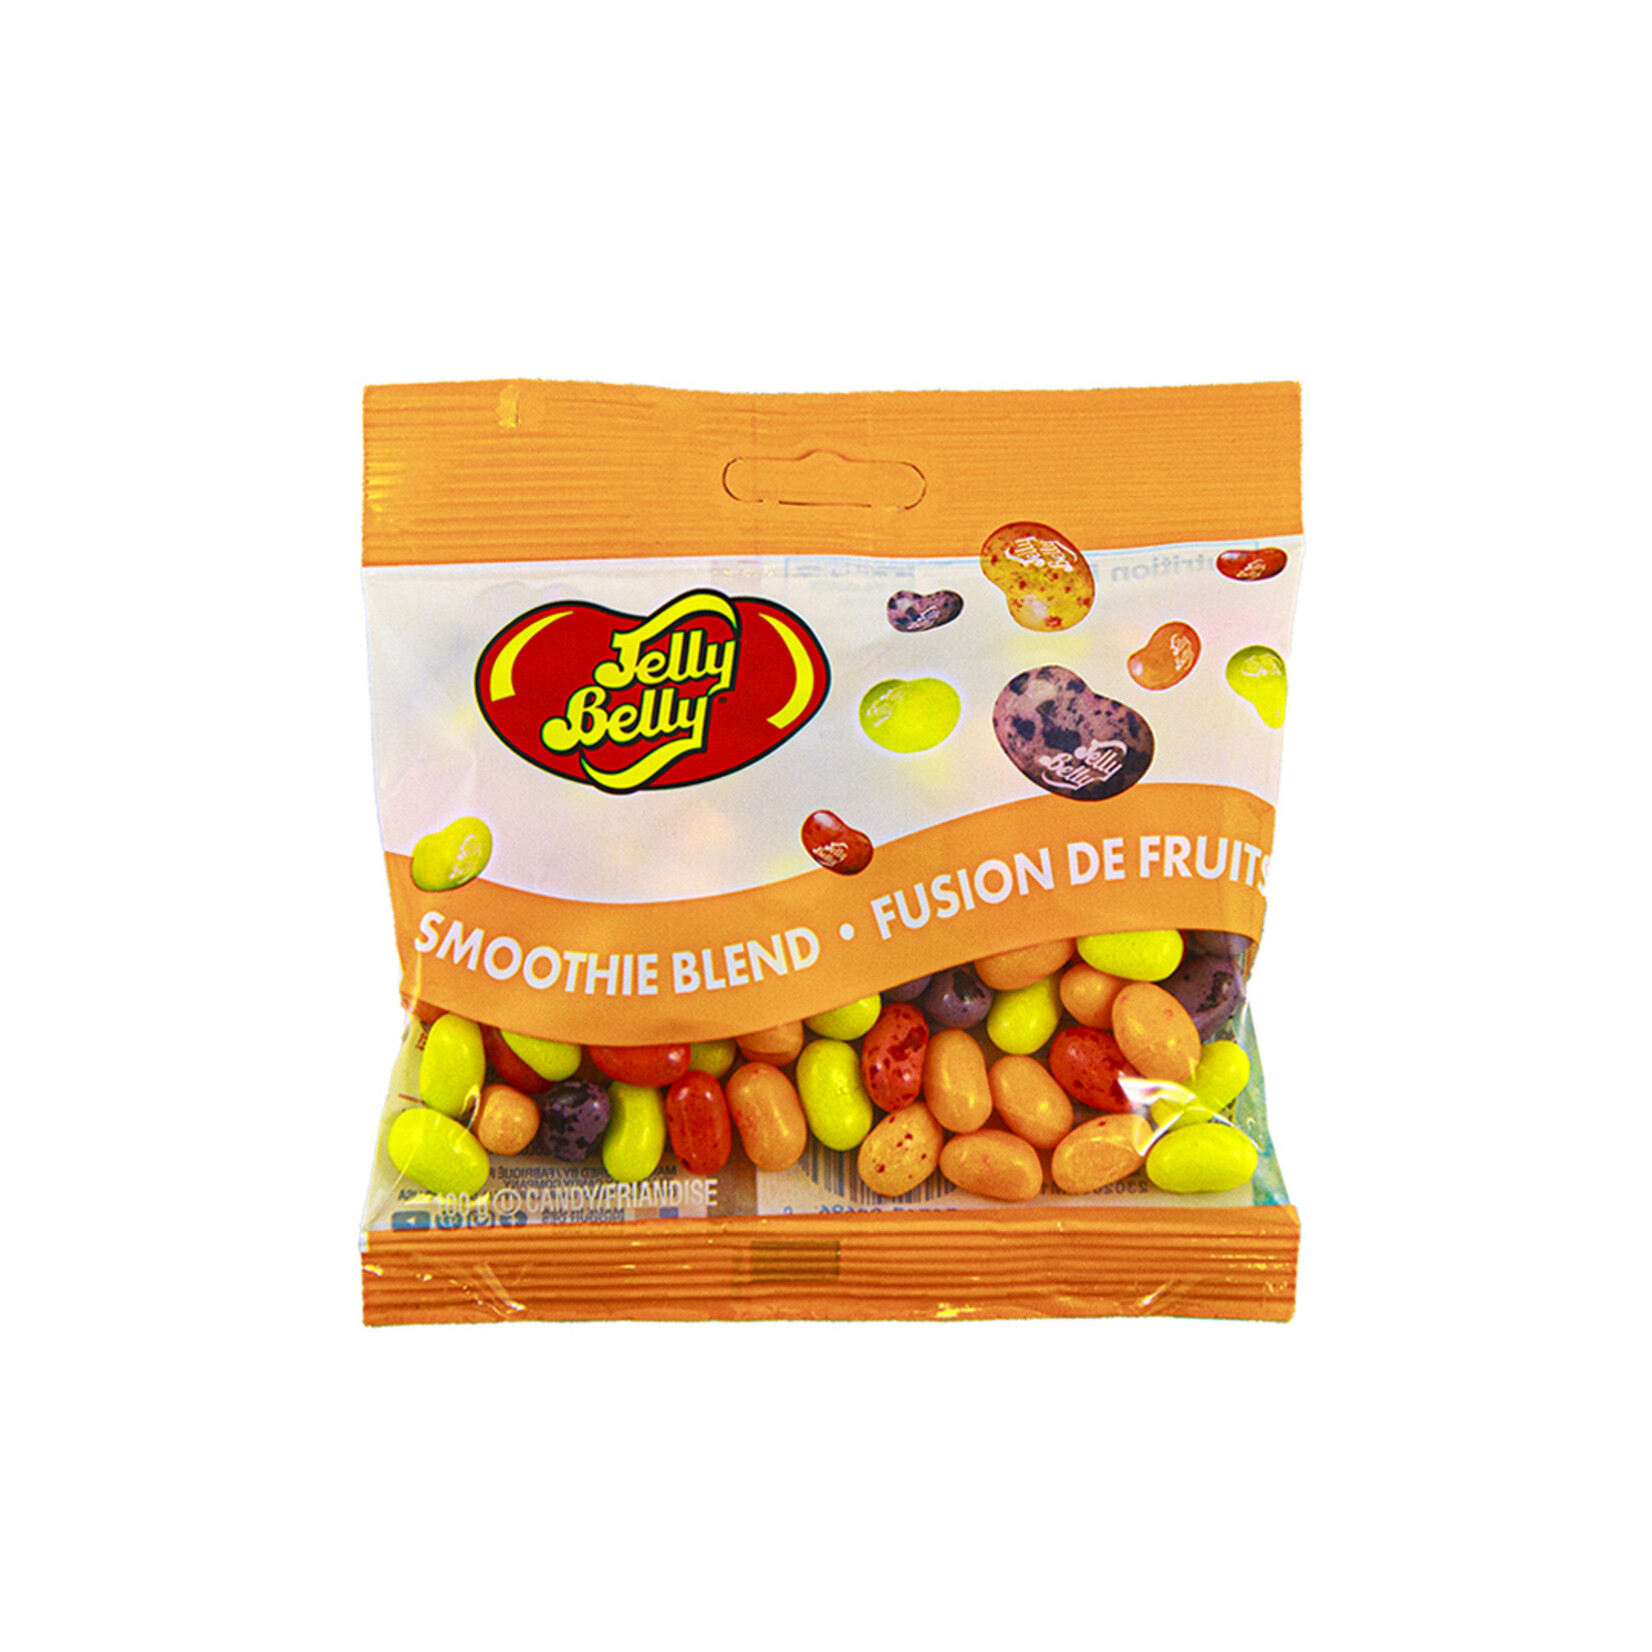 Jelly Belly Bonbons Jelly Belly fusion de fruits 100g